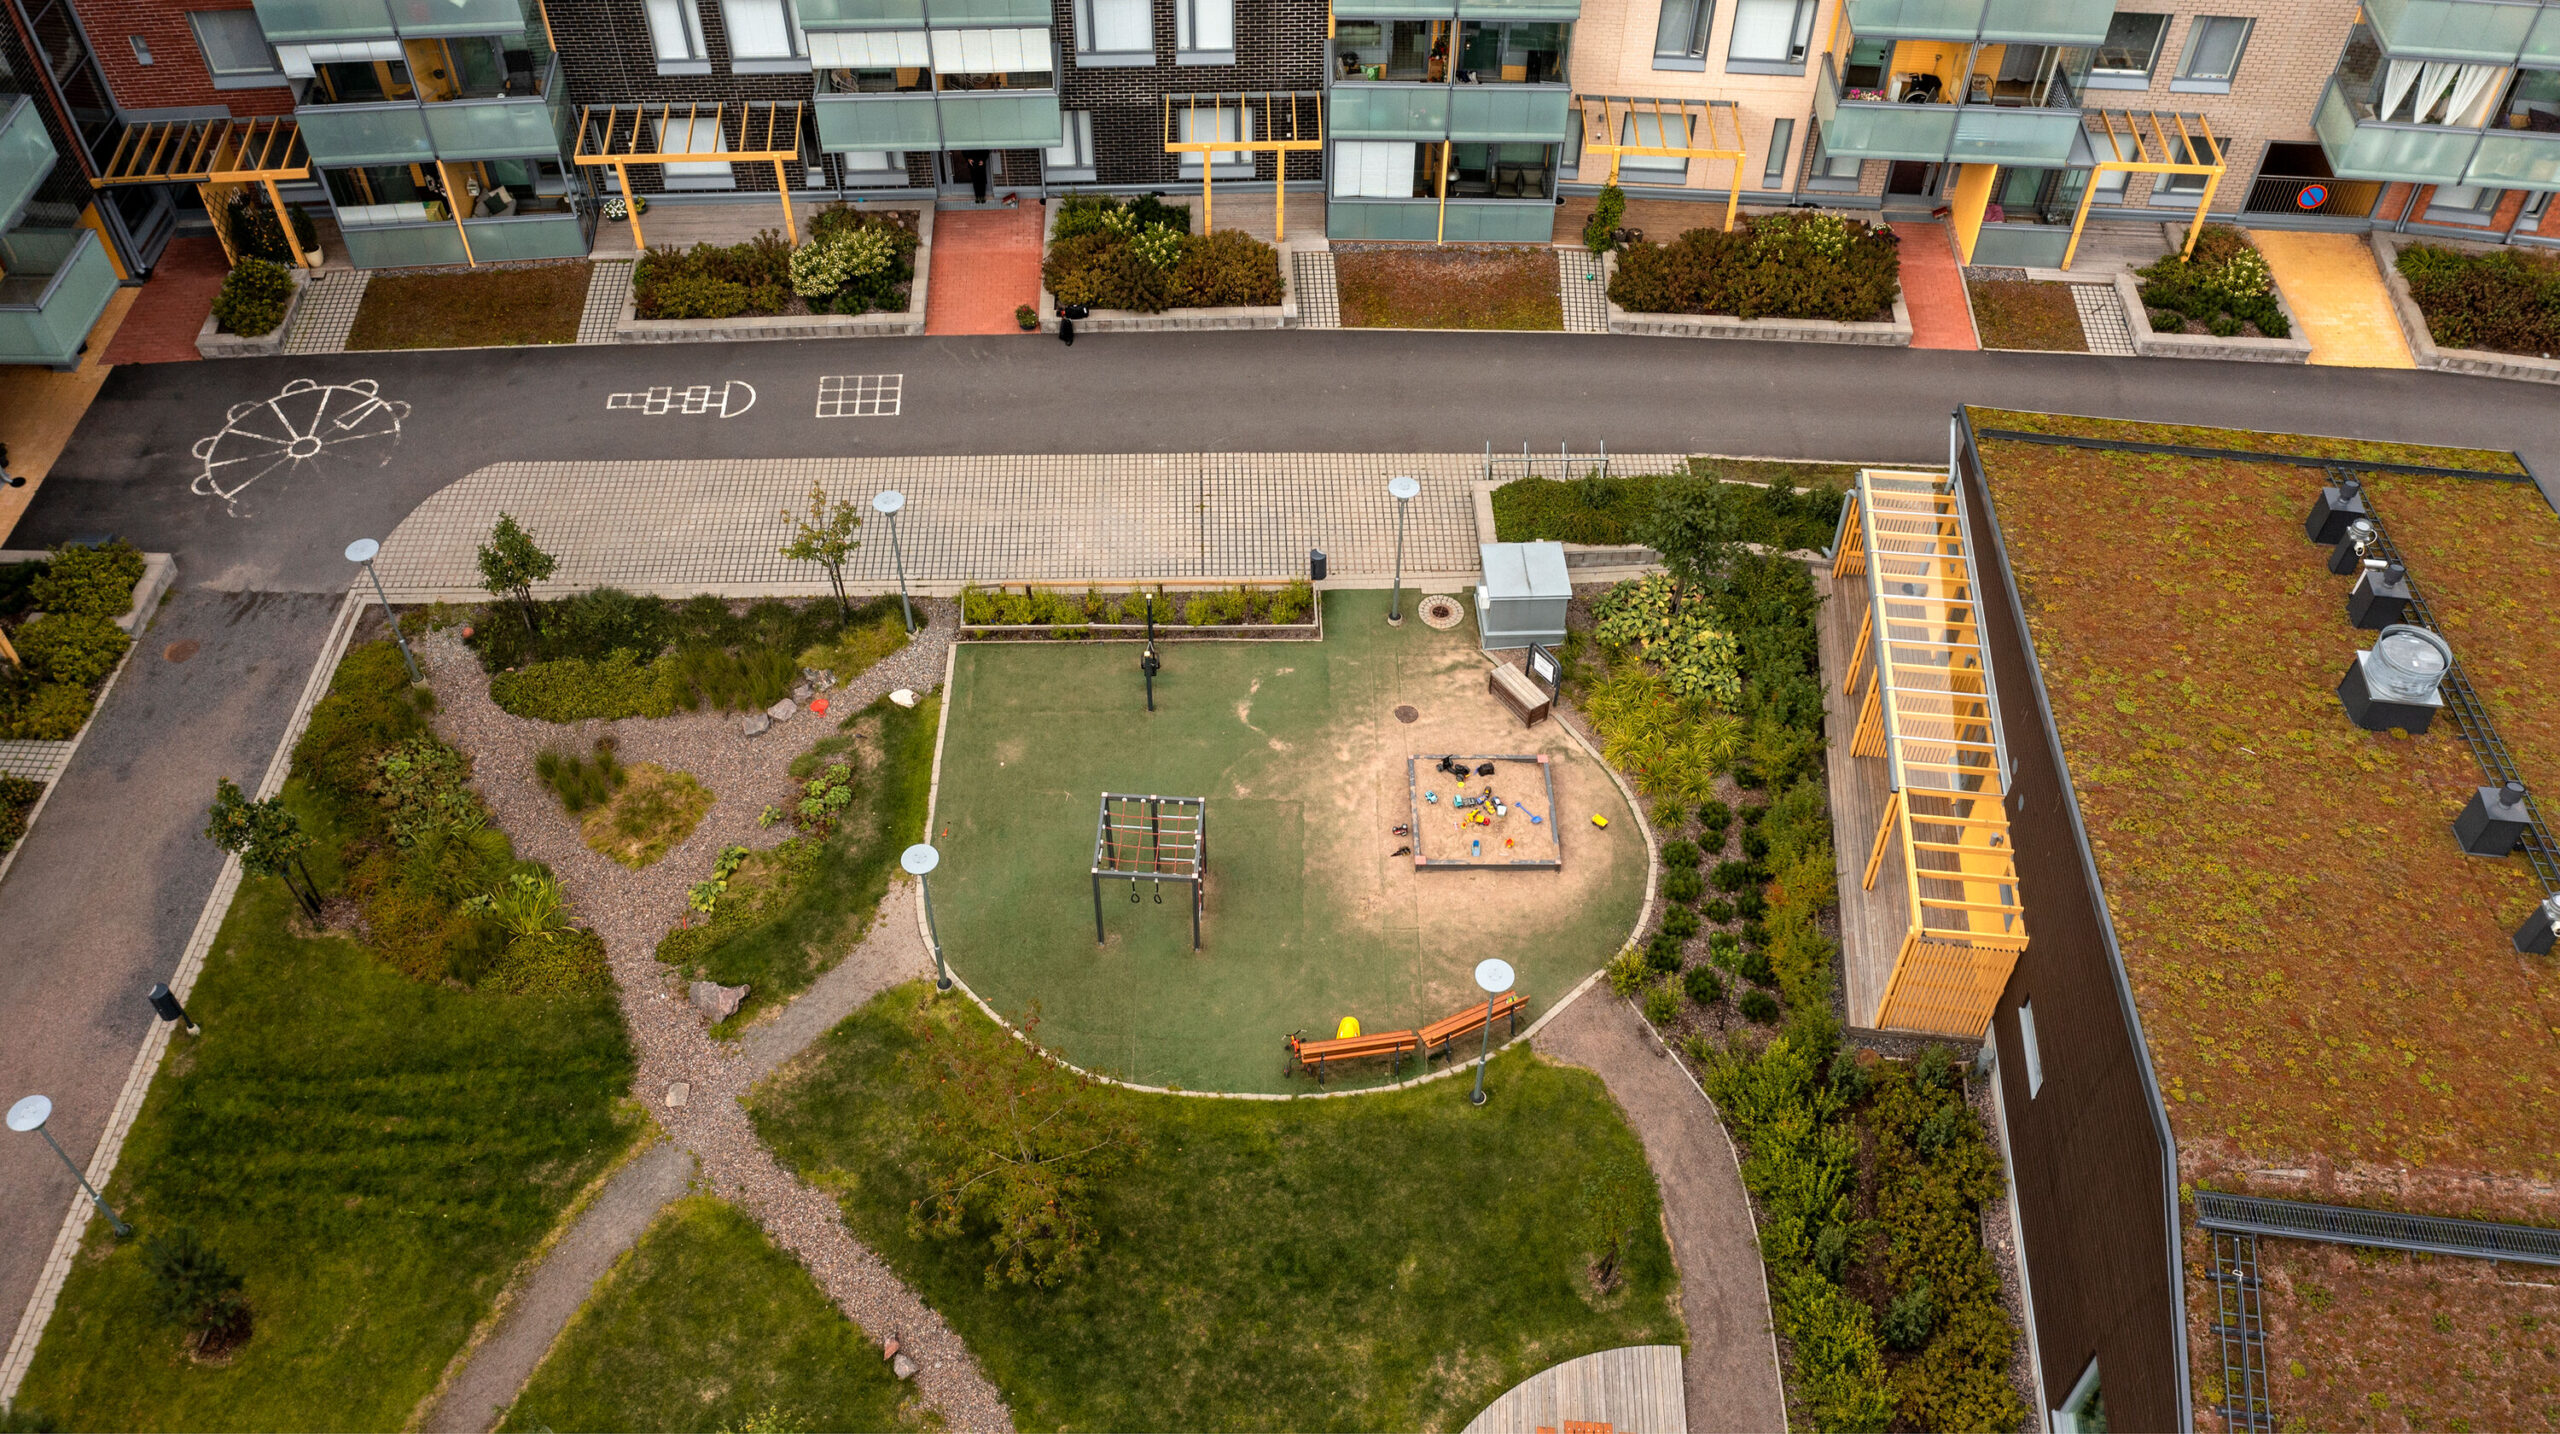 A drone photo showing a green roof, raingardens in front of the buildings, and permeable surfaces.